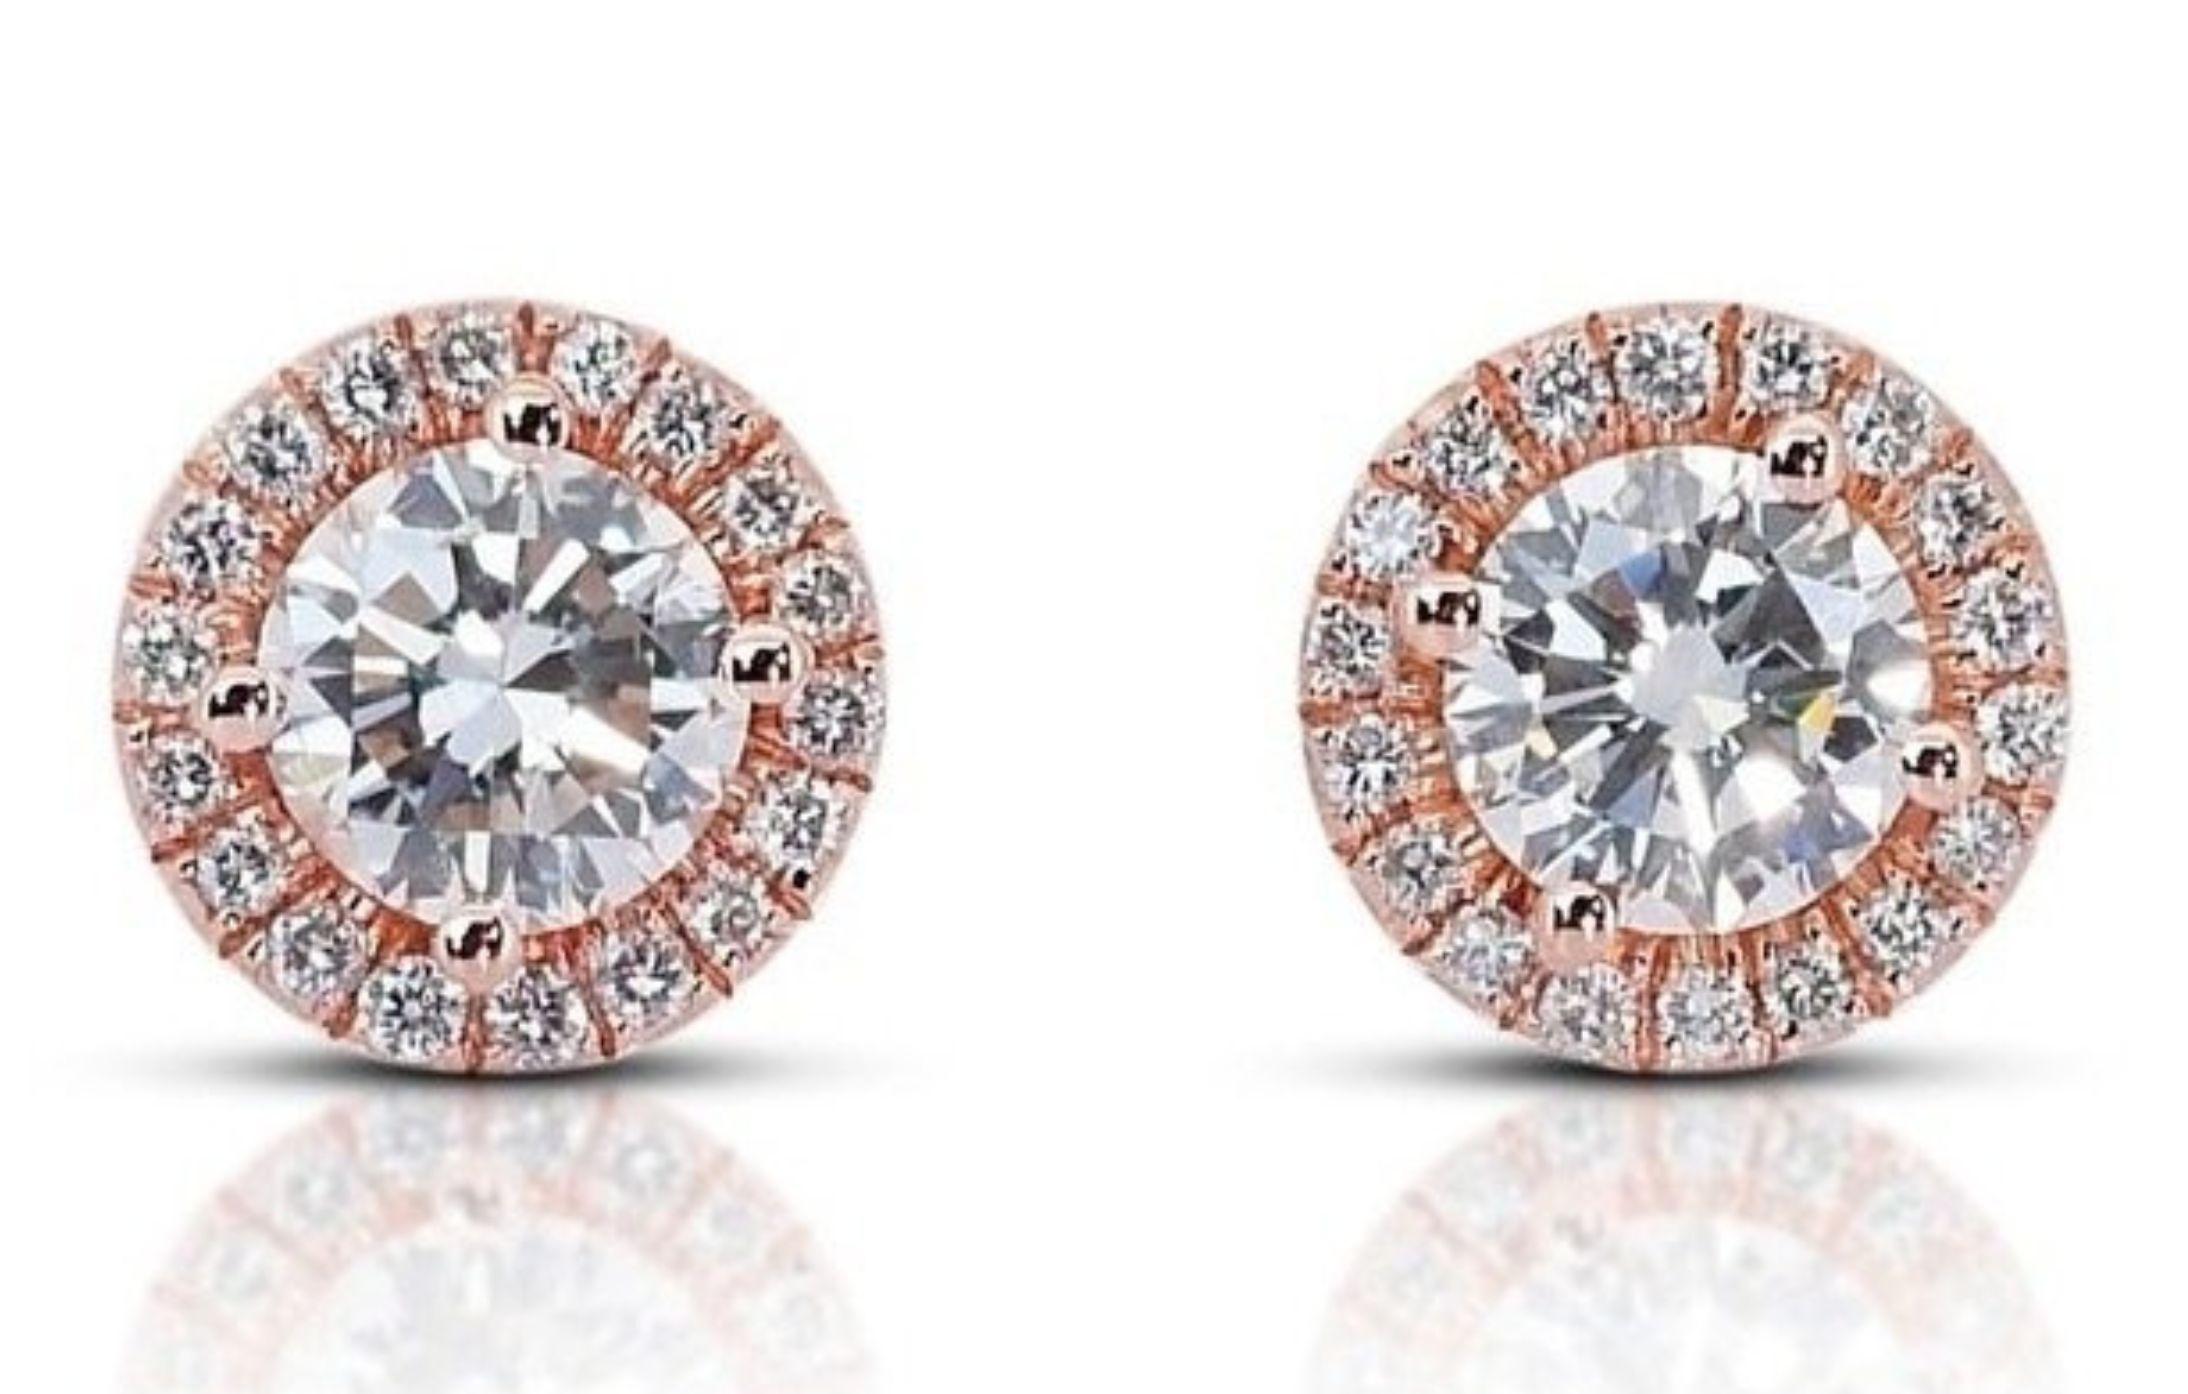 These stunning diamond earrings are the perfect addition to any jewelry collection. The 1.2 carat round brilliant main stone is dazzling and eye-catching, and the 0.2 carats of side diamonds add even more sparkle and brilliance. The earrings are